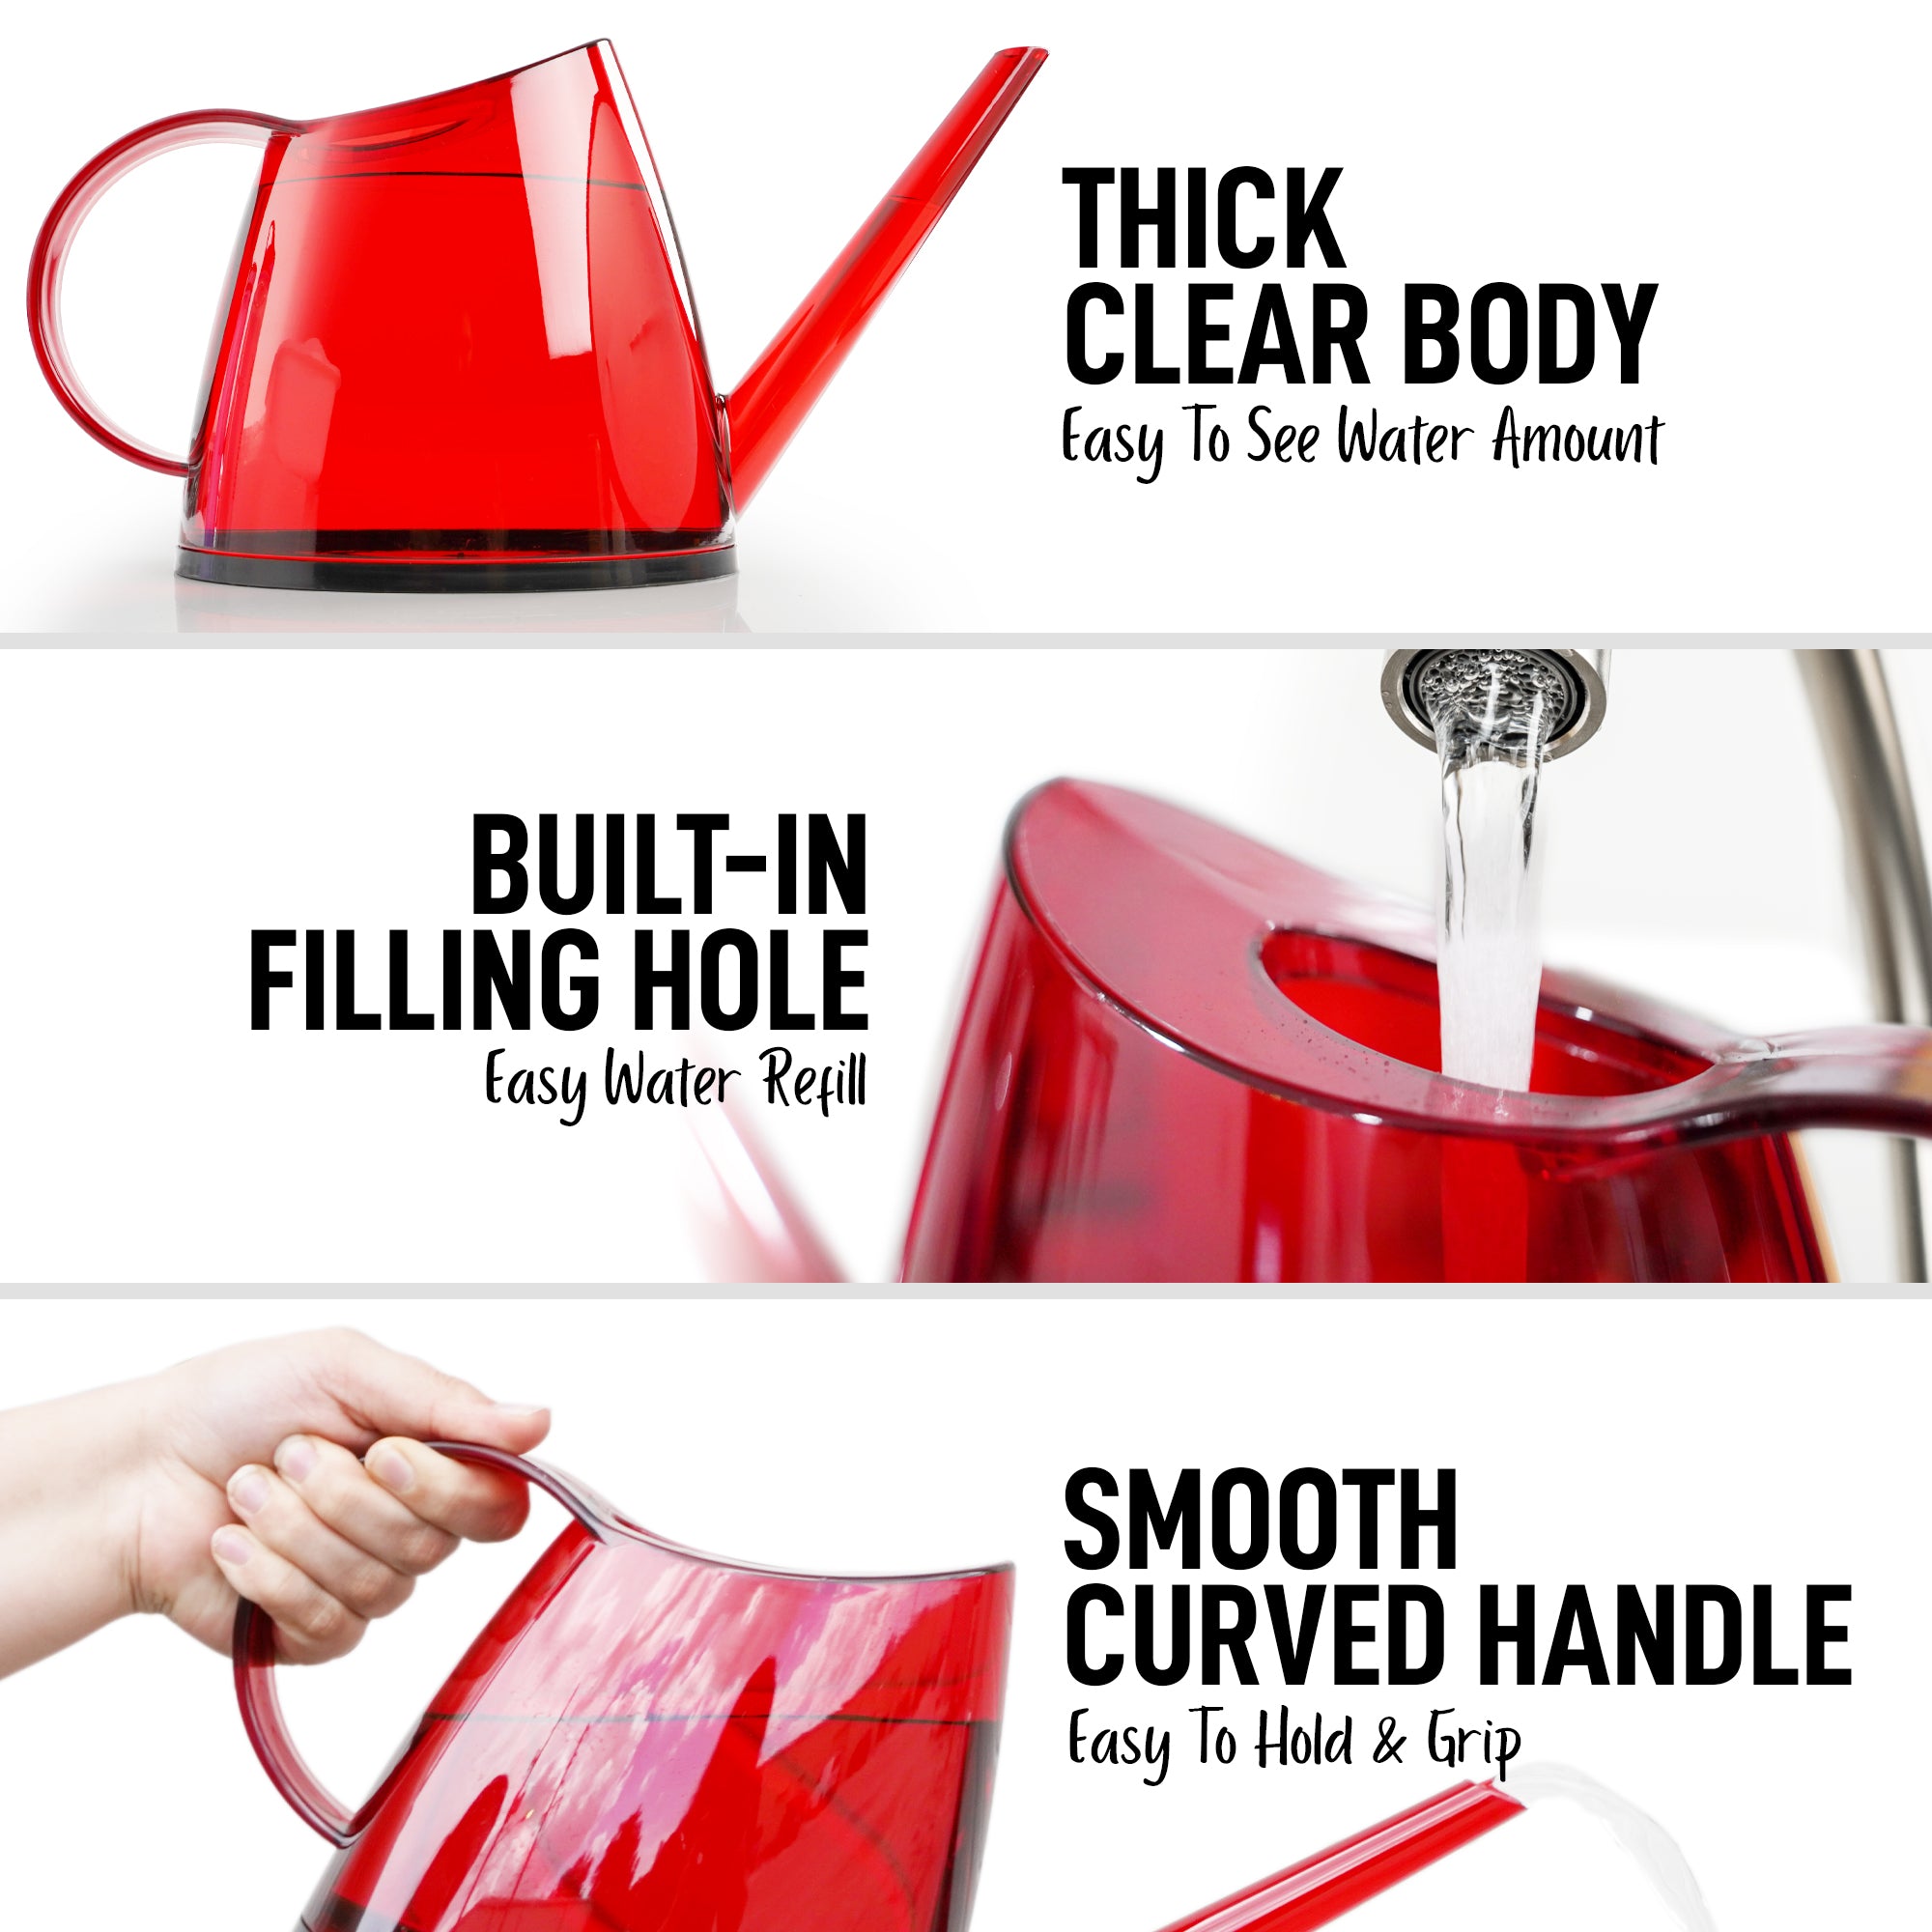 Zulay Home Small Watering Can from Zulay Kitchen